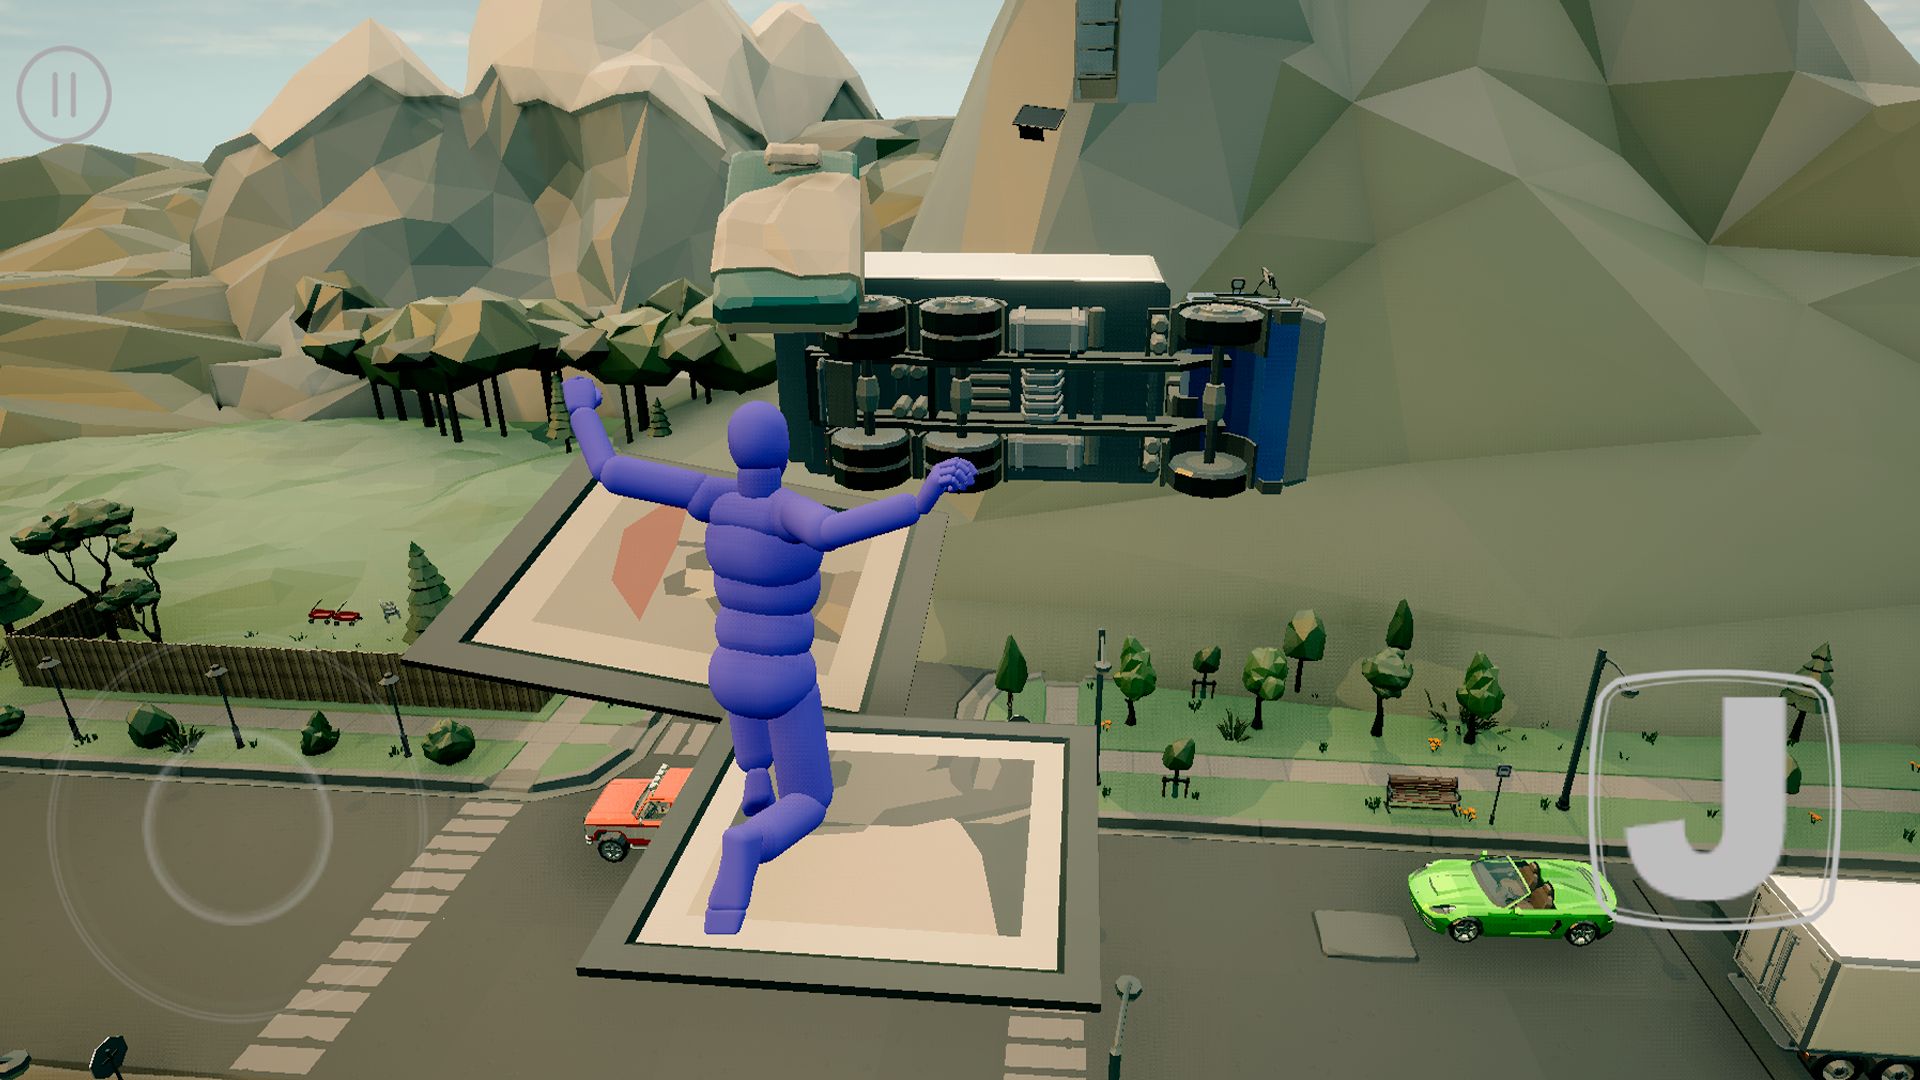 Only Up! Parkour Ragdoll - Android game screenshots.